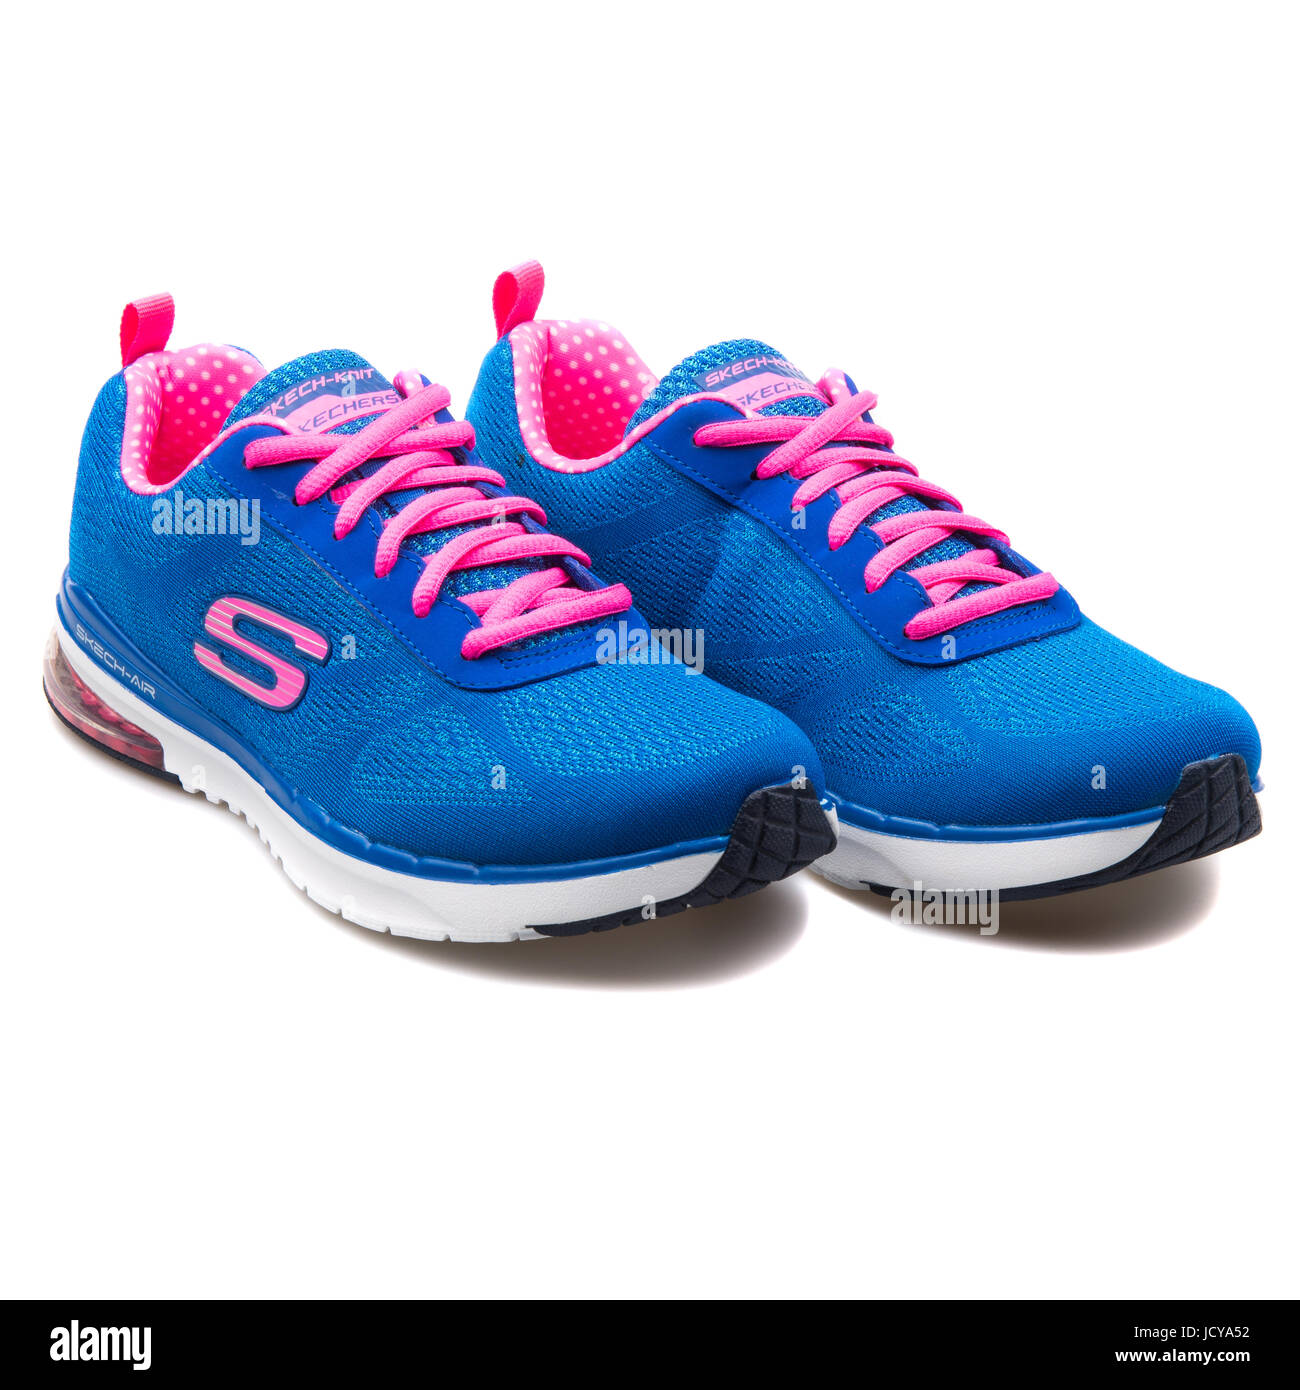 Skechers Skech-Air Infinity Blue and Pink Women's Running Shoes - 12111-BLHP Stock Photo Alamy